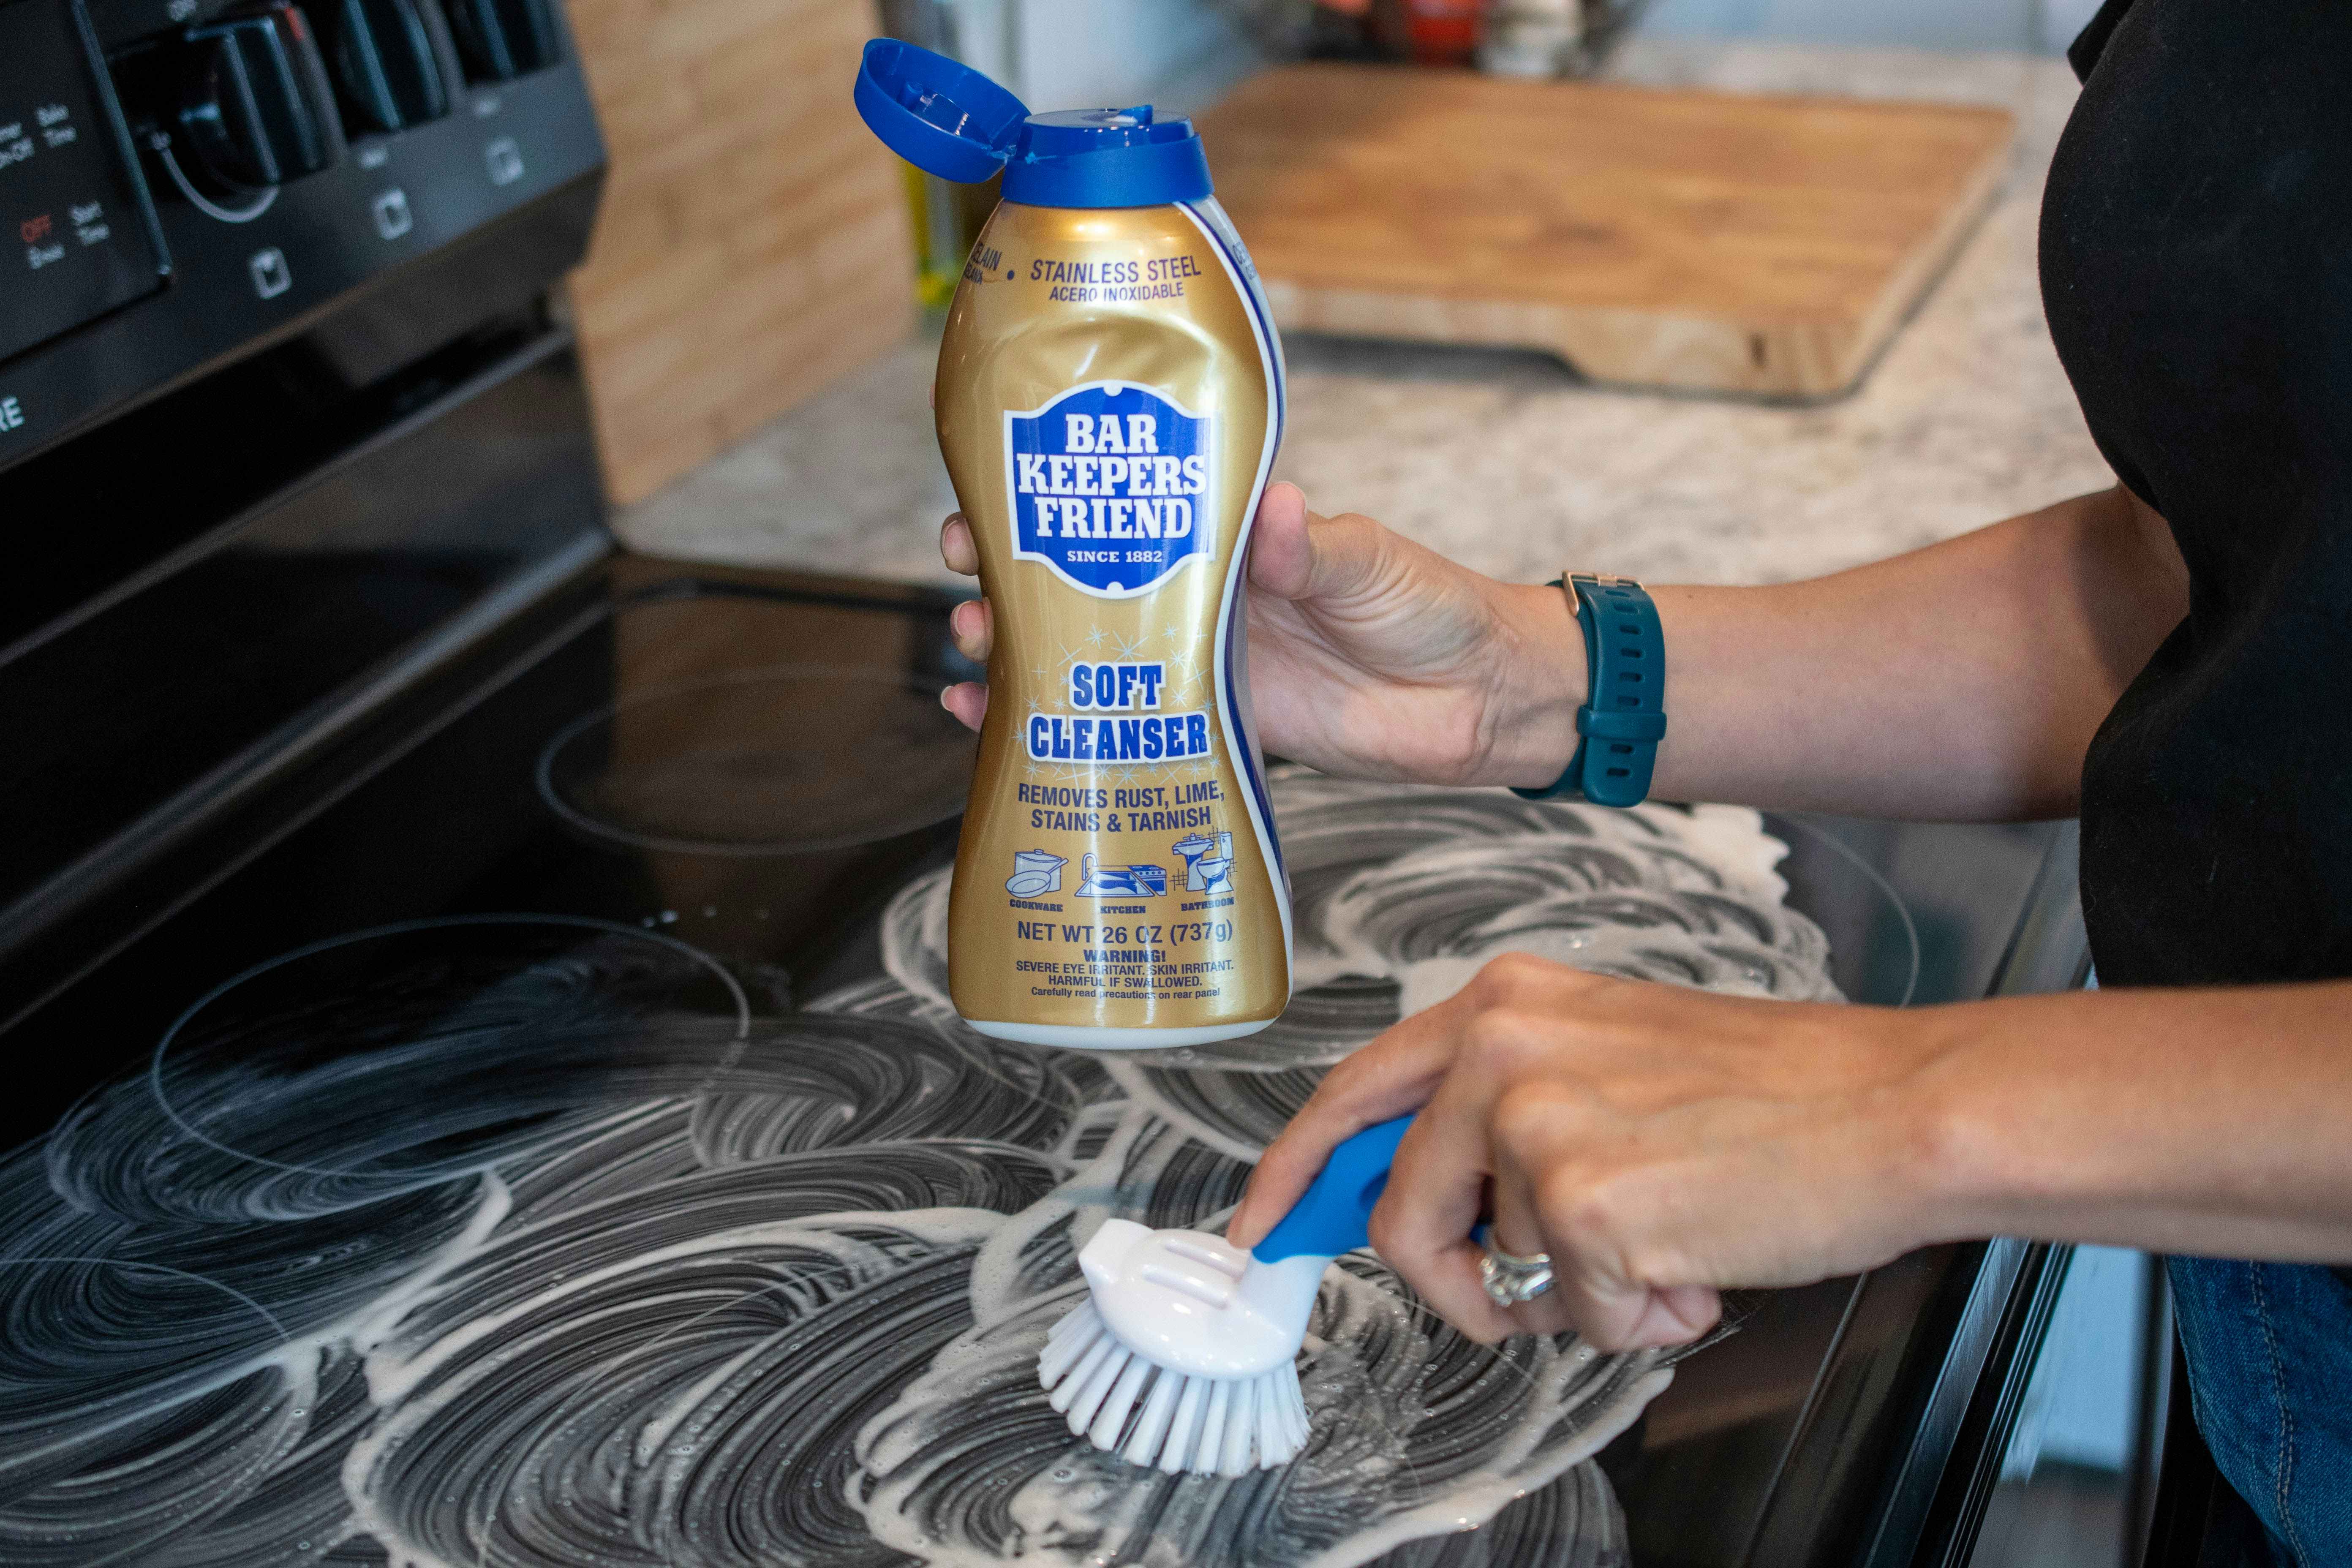 Bar Keepers Friend Cooktop Cleaner - 13 oz bottle